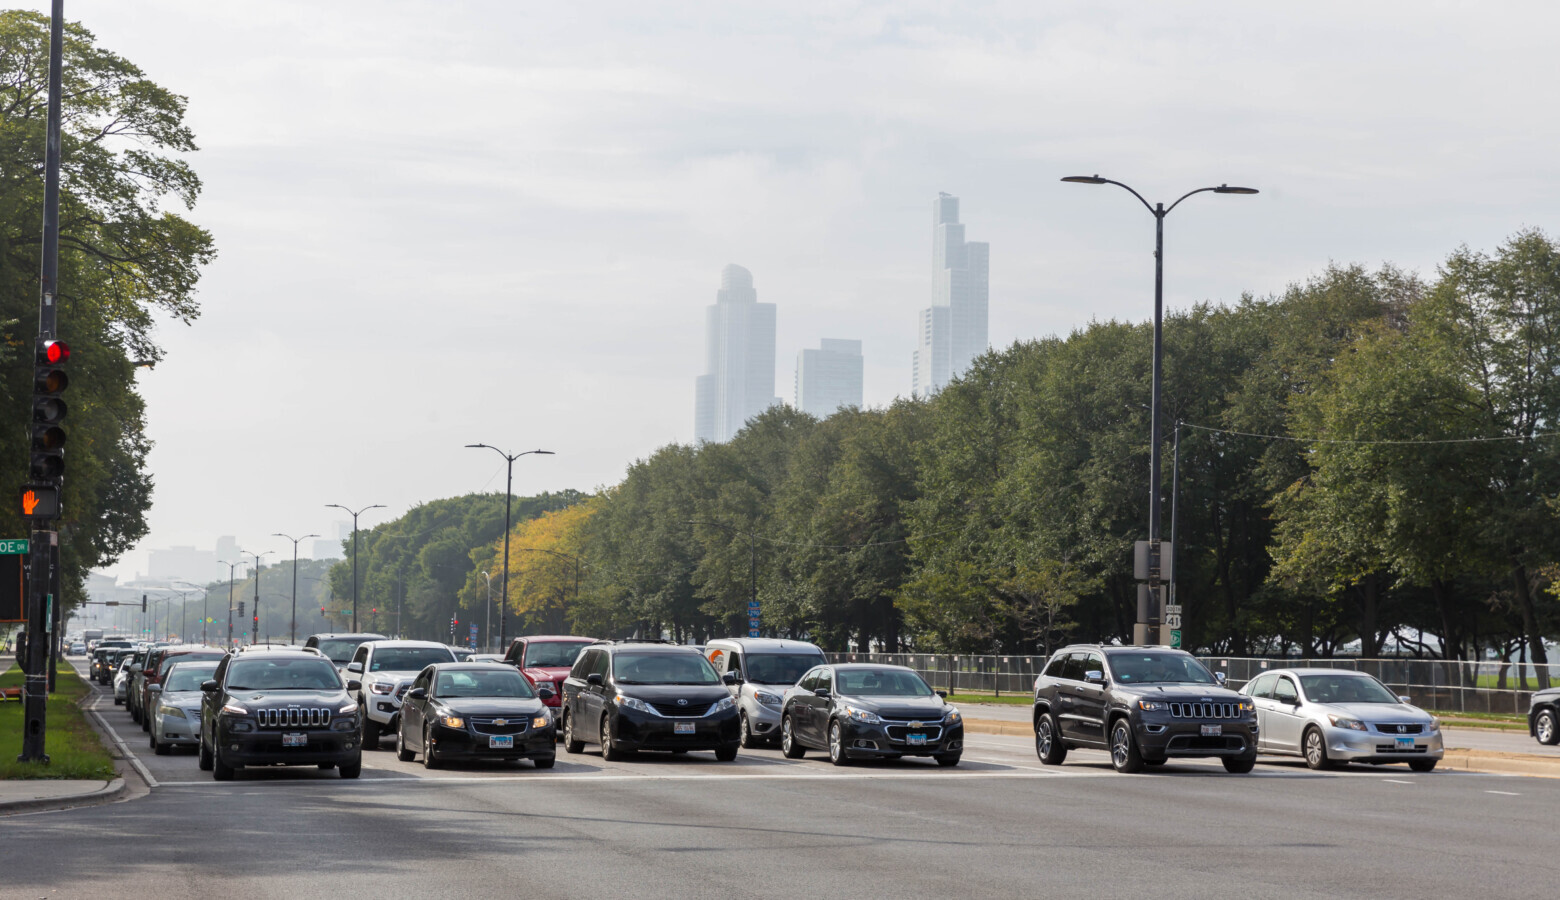 Chicago traffic at an intersection in 2019. IUPUI professor Gabriel Filippelli said the lack of cars on the road reduced carbon emissions during the Stay-At-Home orders last year. (Marco Verch/Flickr)